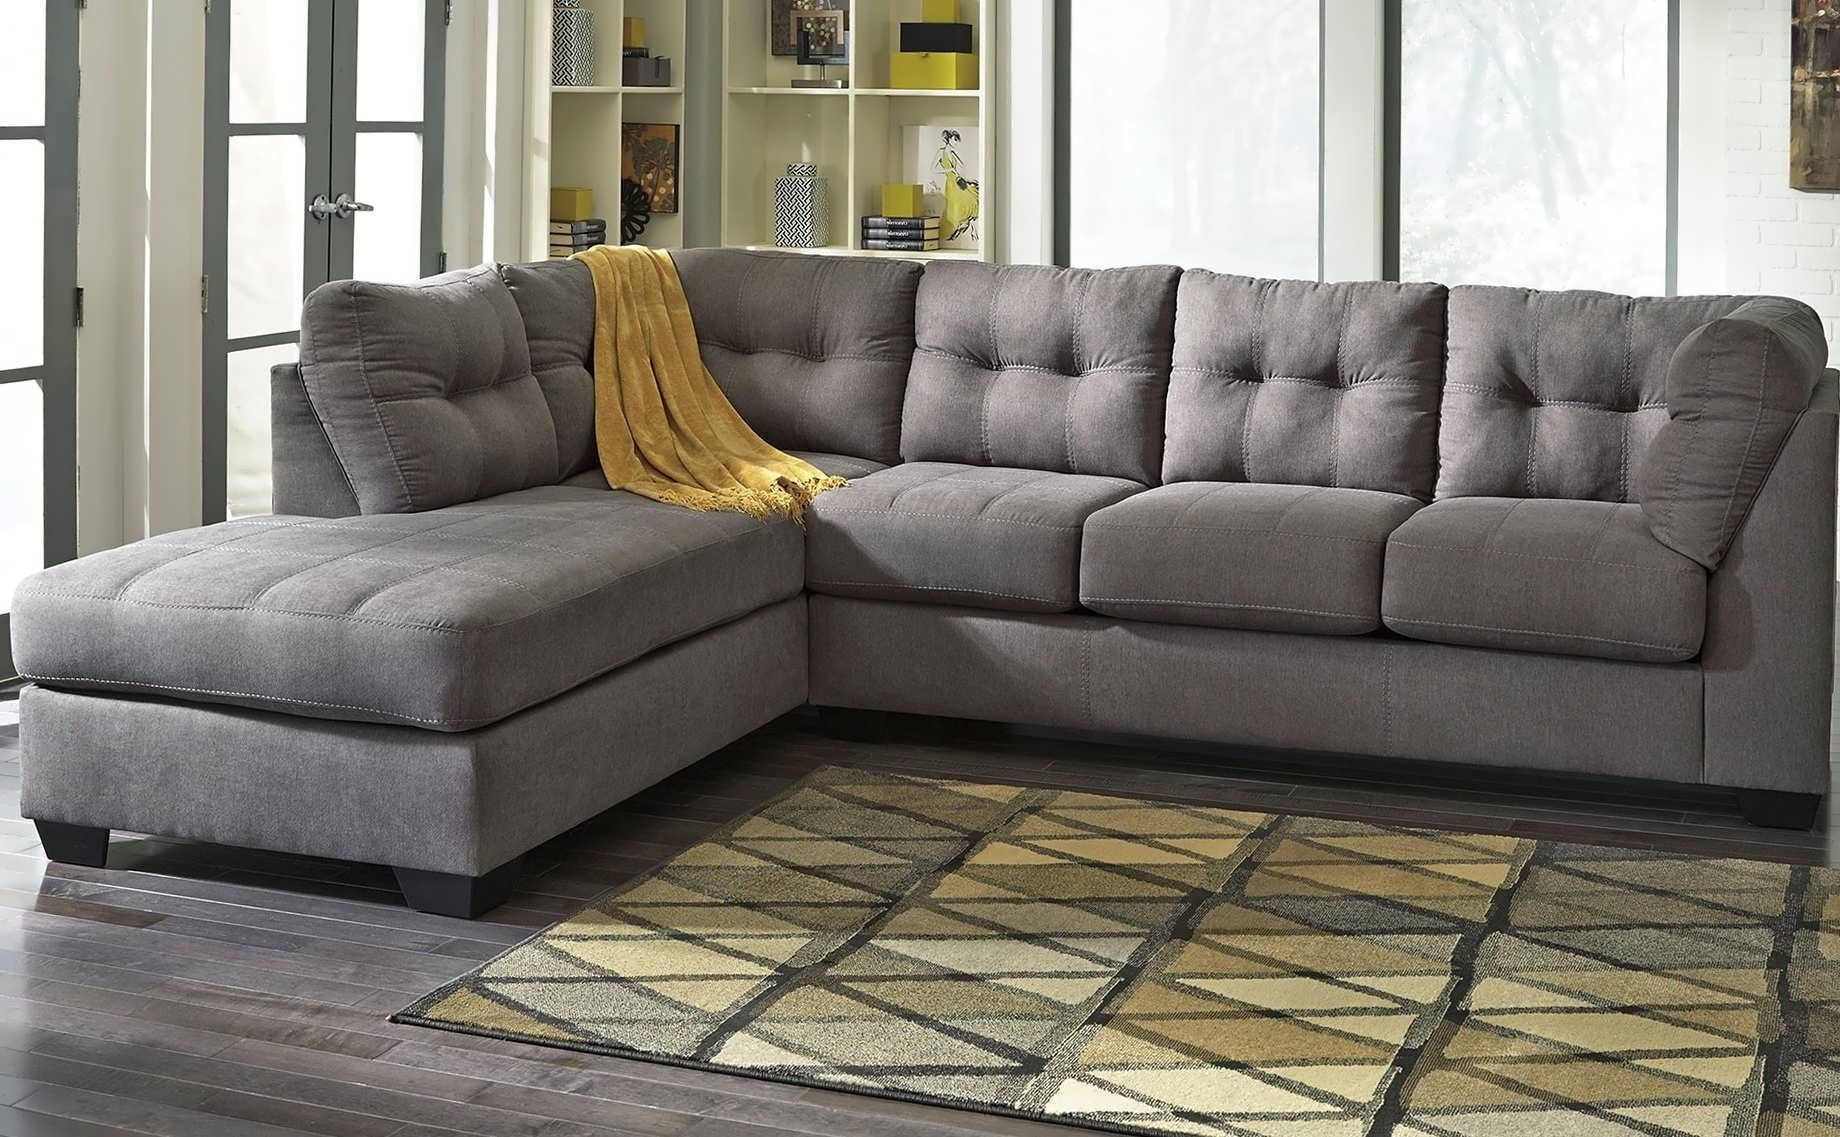 2017 Grey Sectional Sofas With Chaise Intended For Sofa : Large Grey Sectional Couch Gray Sectional Couch Large (View 1 of 15)